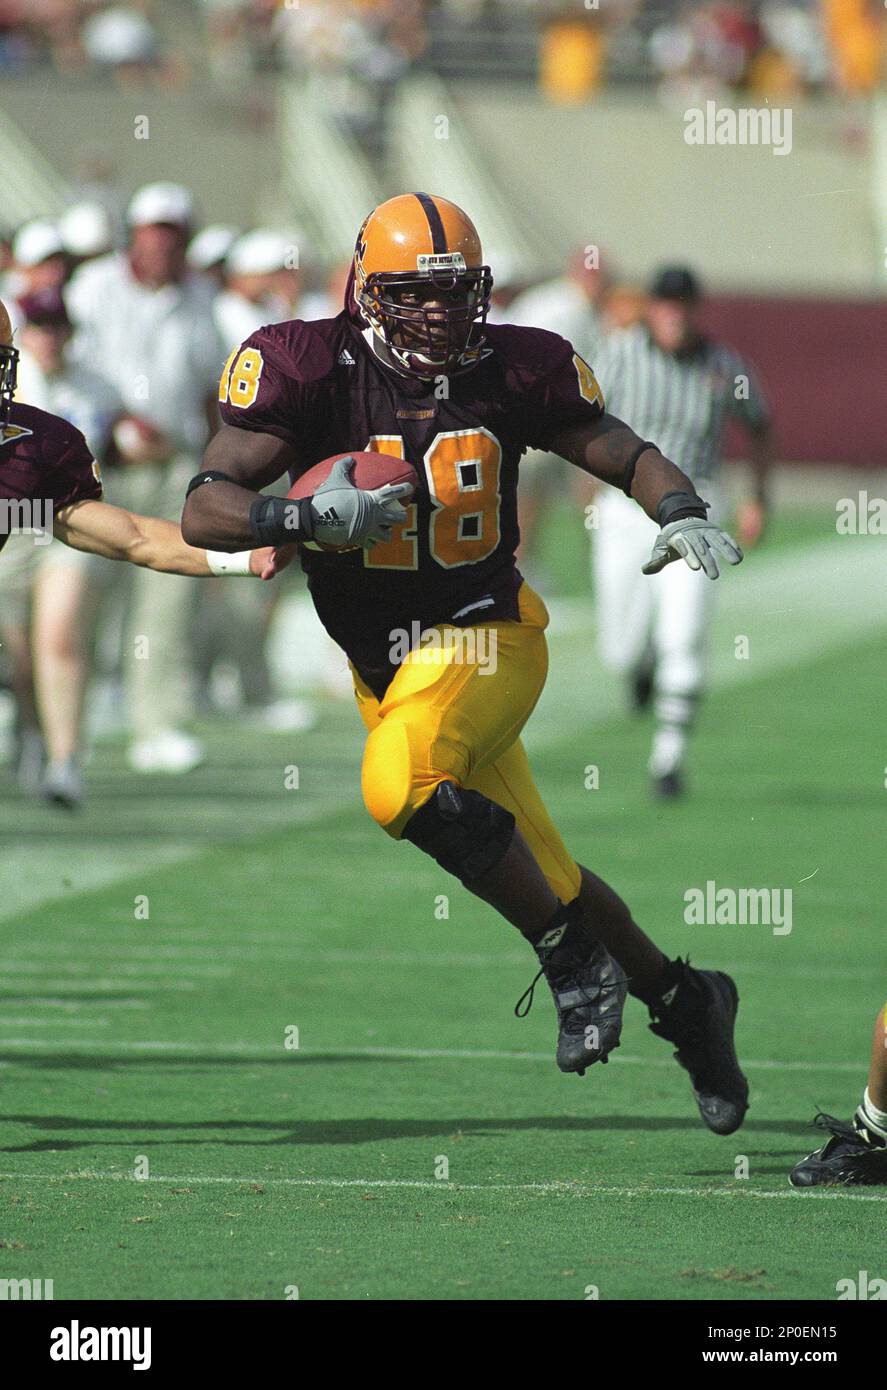 Arizona State defensive End Terrell Suggs in the first half during an NCAA  college football game against California, Saturday, October 7, 2000, in  Tempe, Arizona. (Rick Scuteri via AP Stock Photo - Alamy